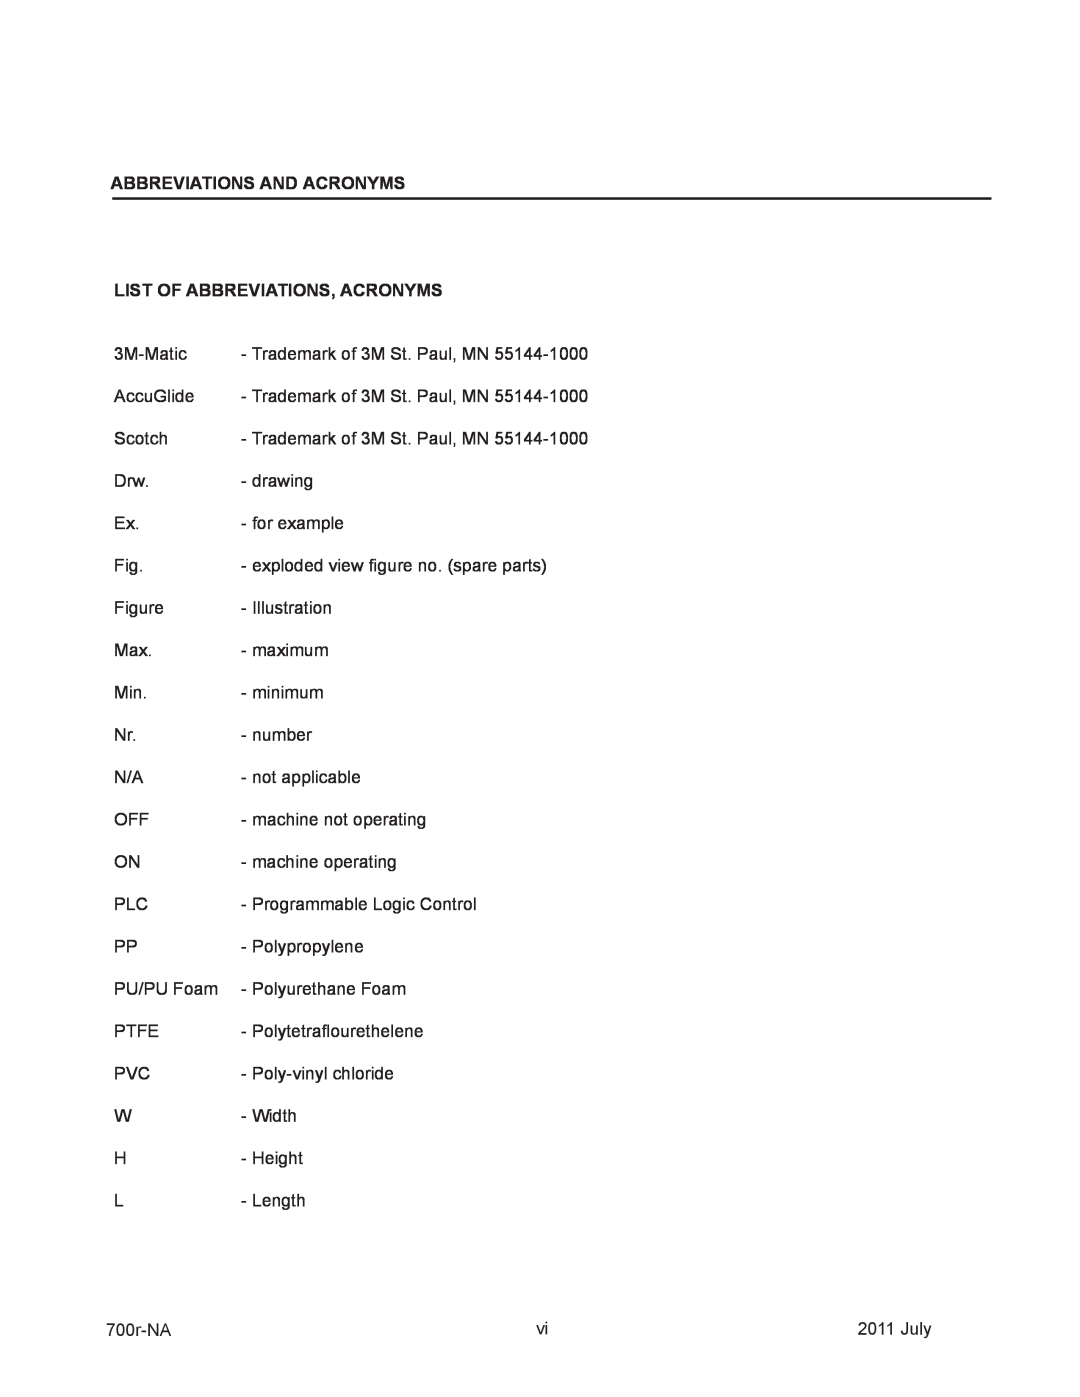 3M 40800 operating instructions Abbreviations And Acronyms, List Of Abbreviations, Acronyms 